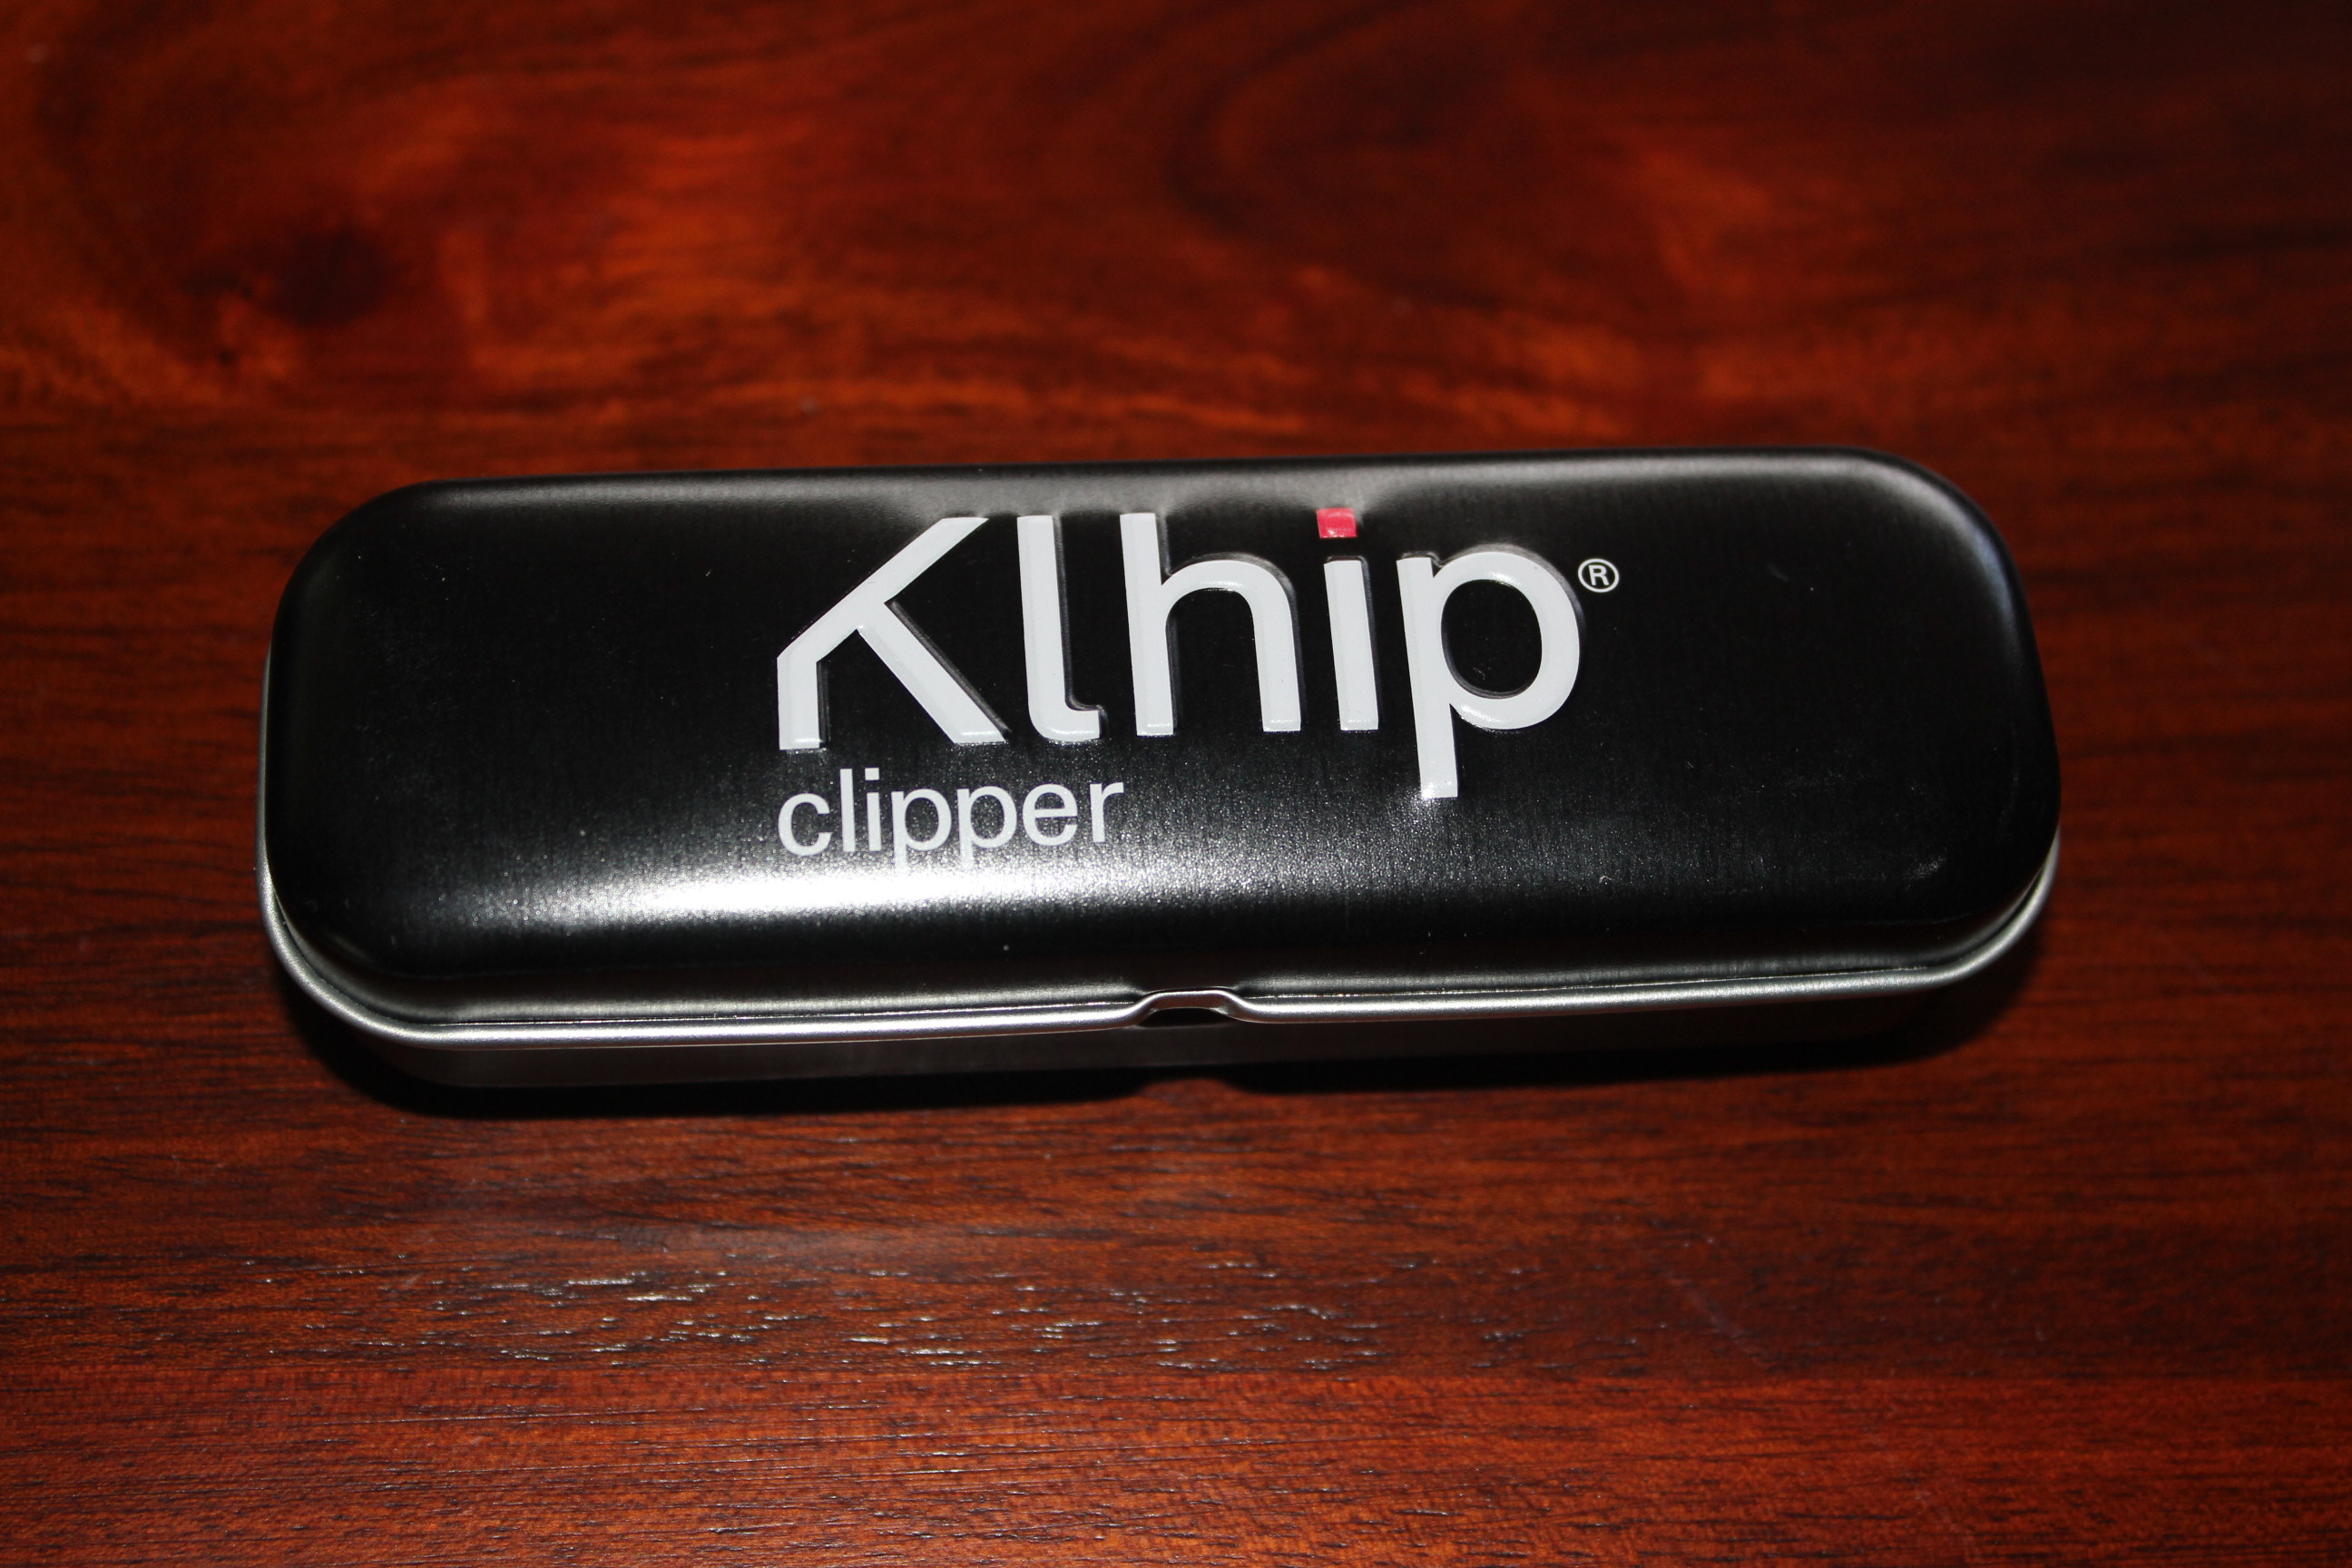 Ultimate Nail Clipper from Klhip